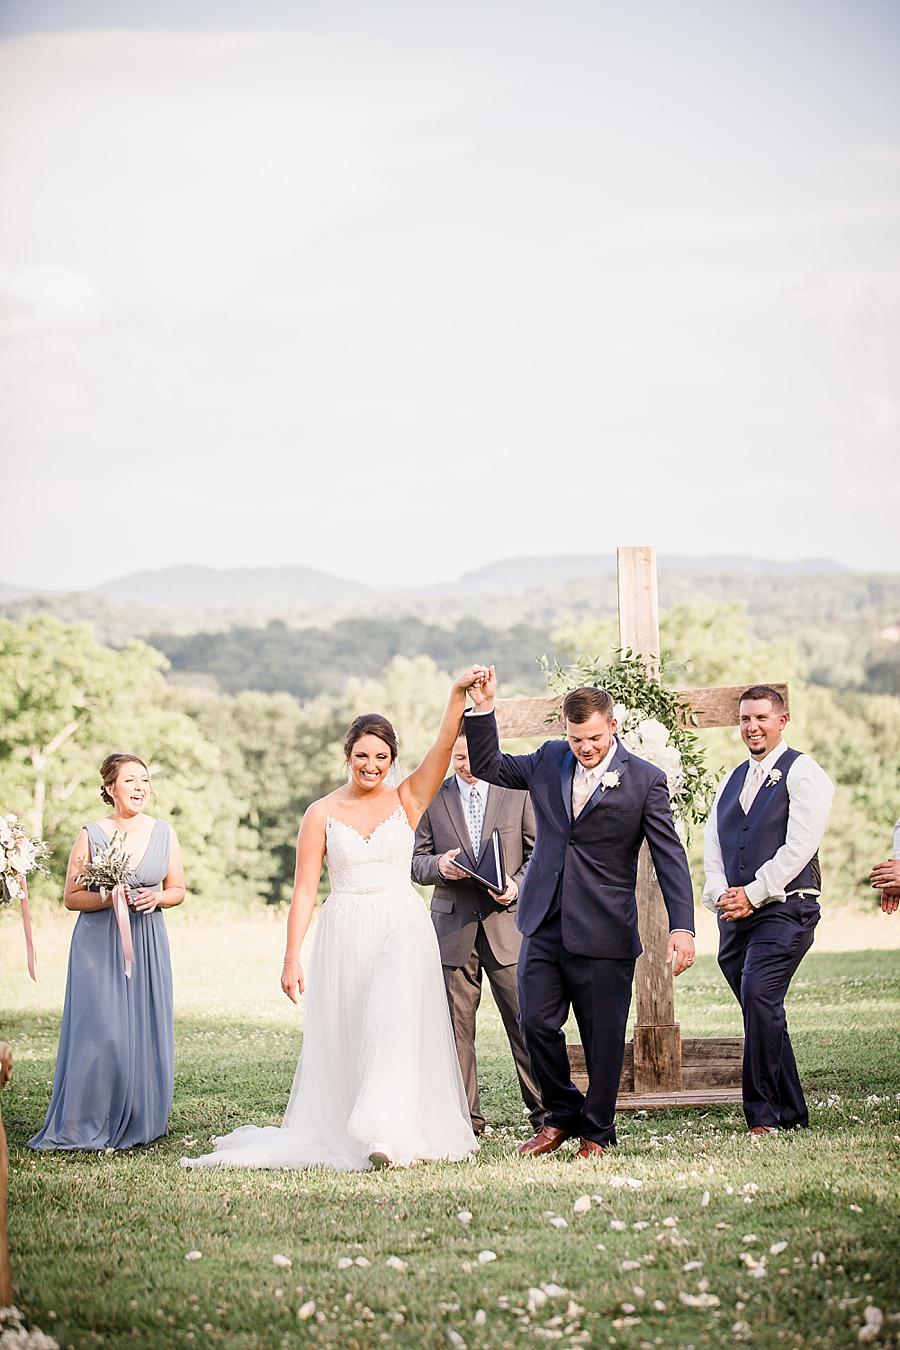 Just married at this Estate of Grace Wedding by Knoxville Wedding Photographer, Amanda May Photos.